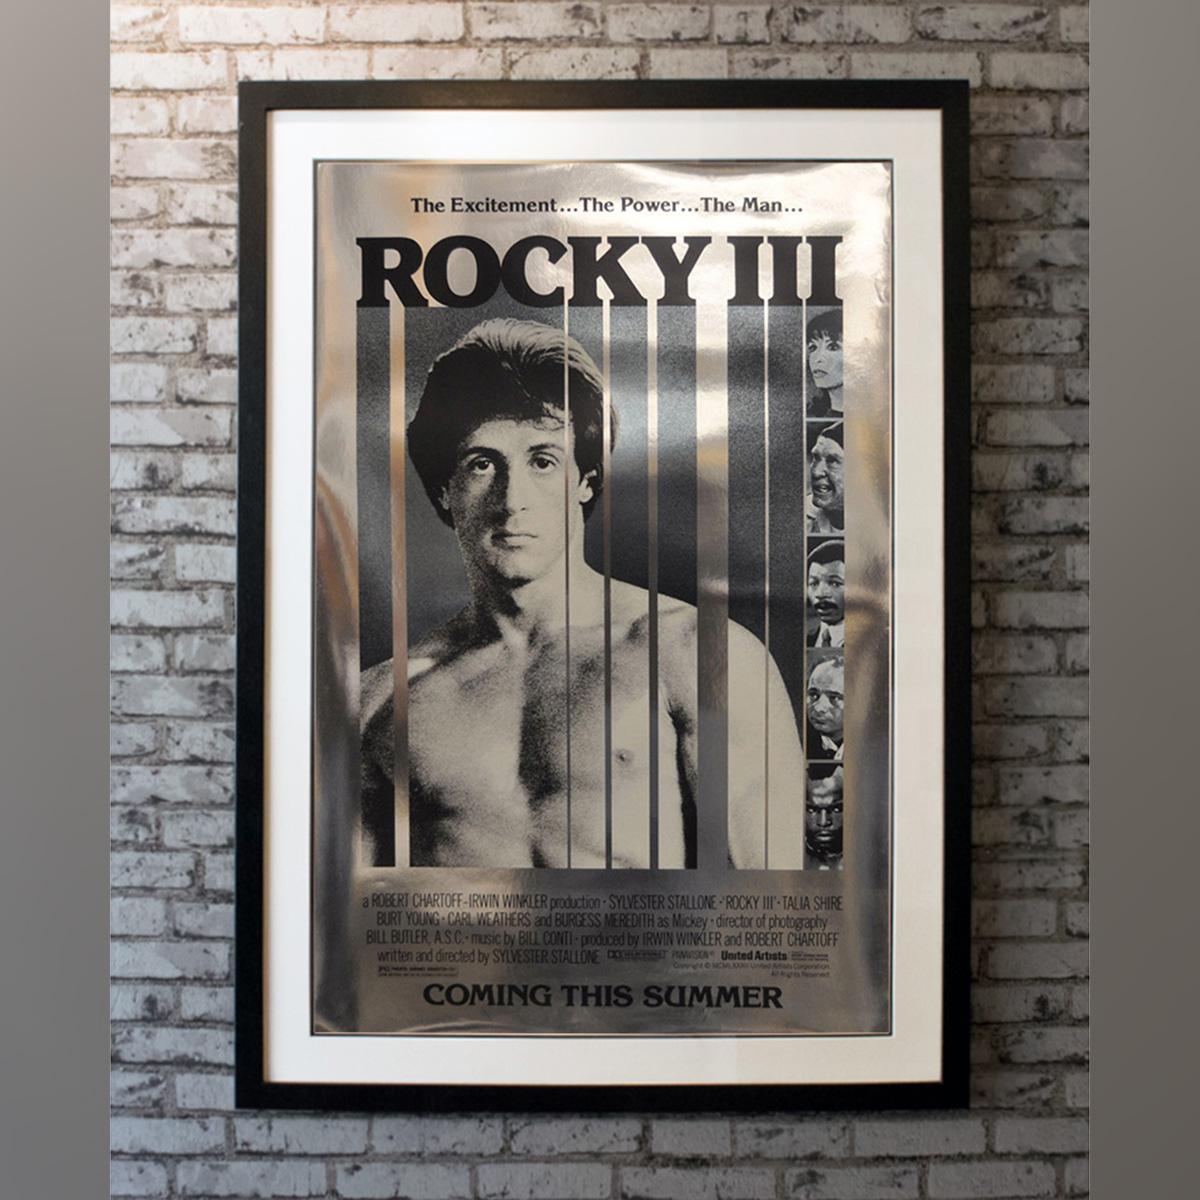 Rocky III advance foil style one sheet. Having become the world heavyweight champion, former working-class boxer Rocky Balboa (Sylvester Stallone) is rich and famous beyond his wildest dreams, which has made him lazy and overconfident. In a double